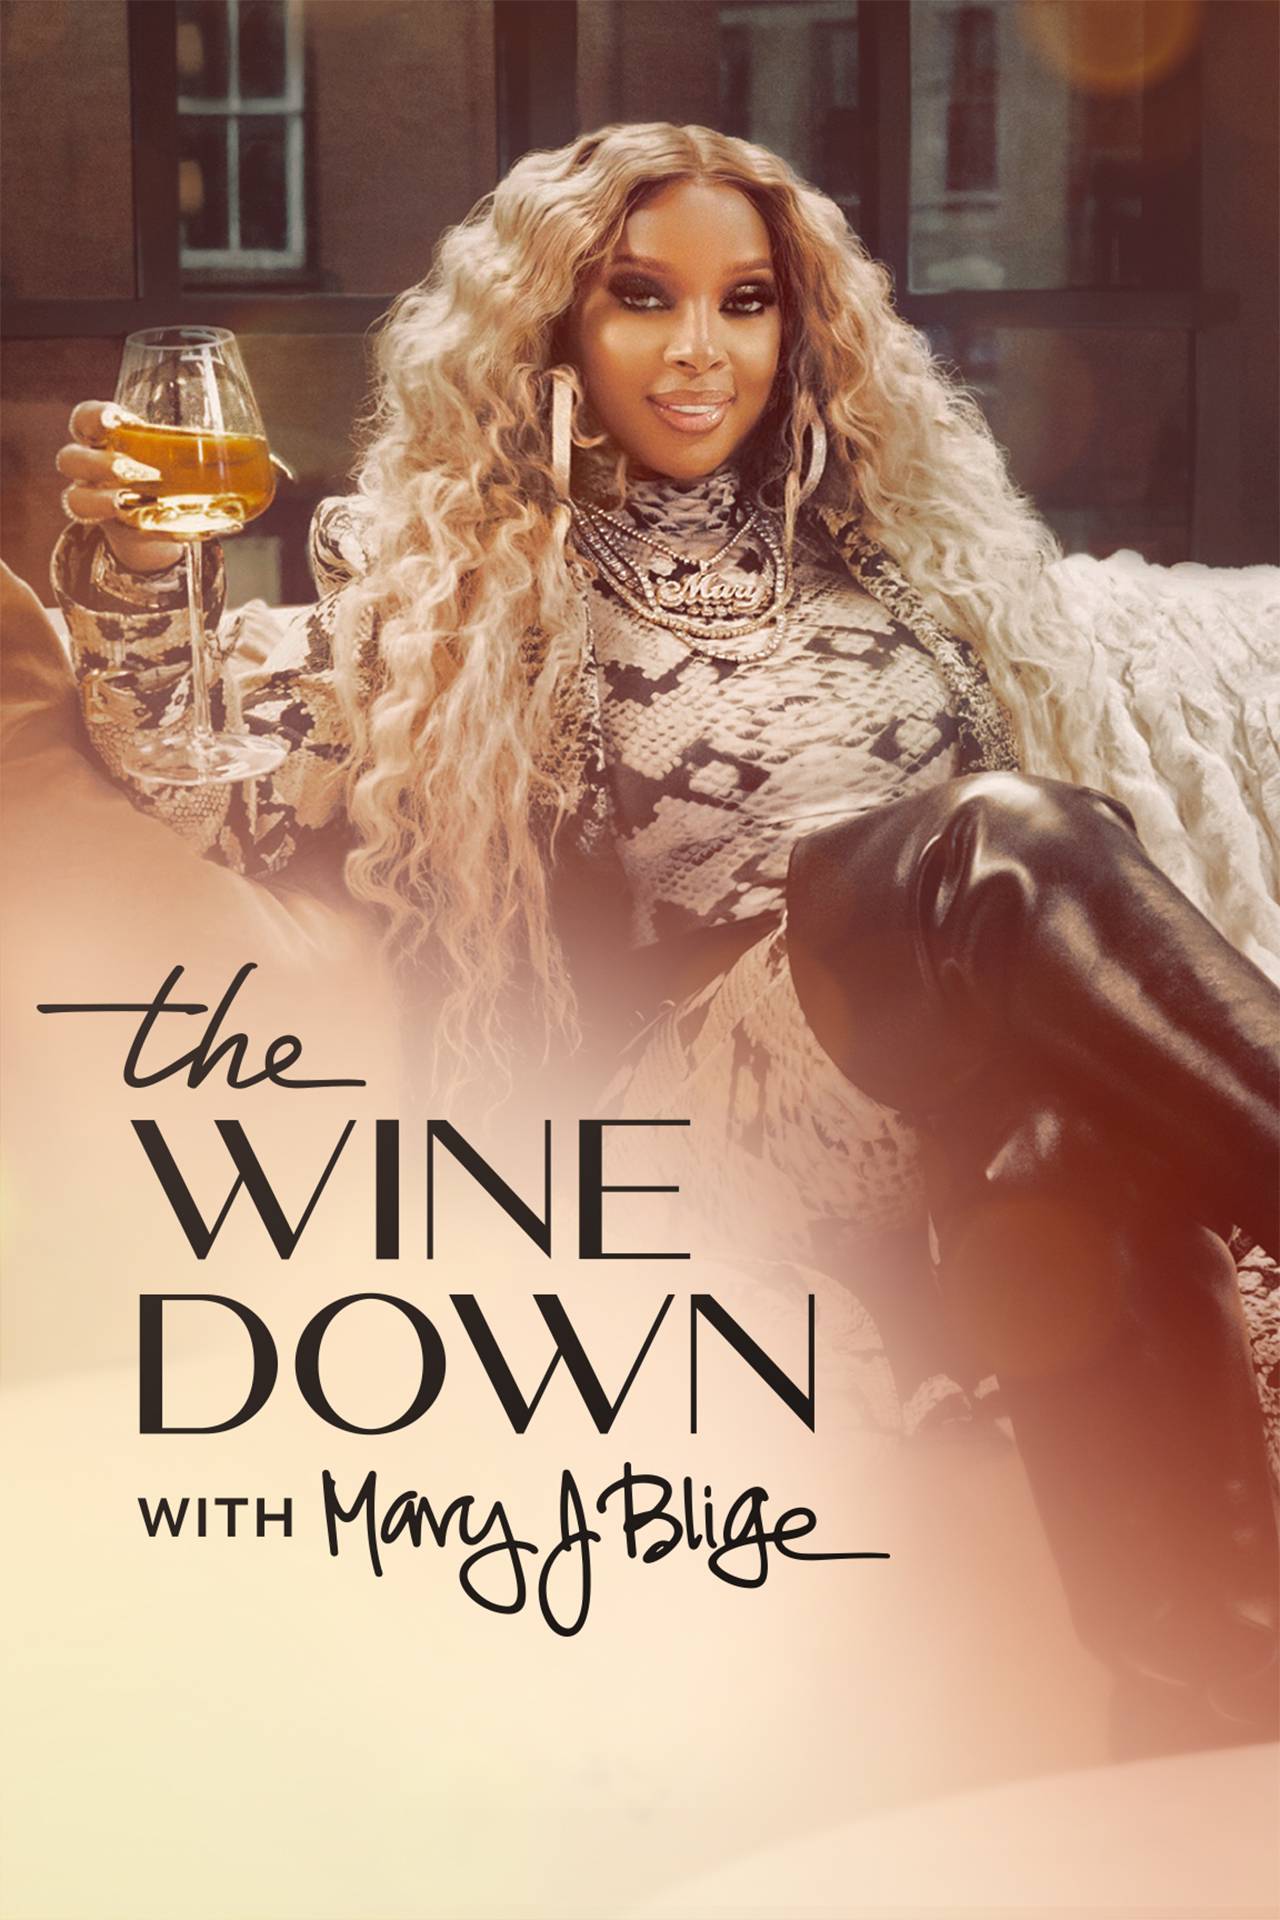 Mary J. Blige To Host Her Own Talk Show On BET